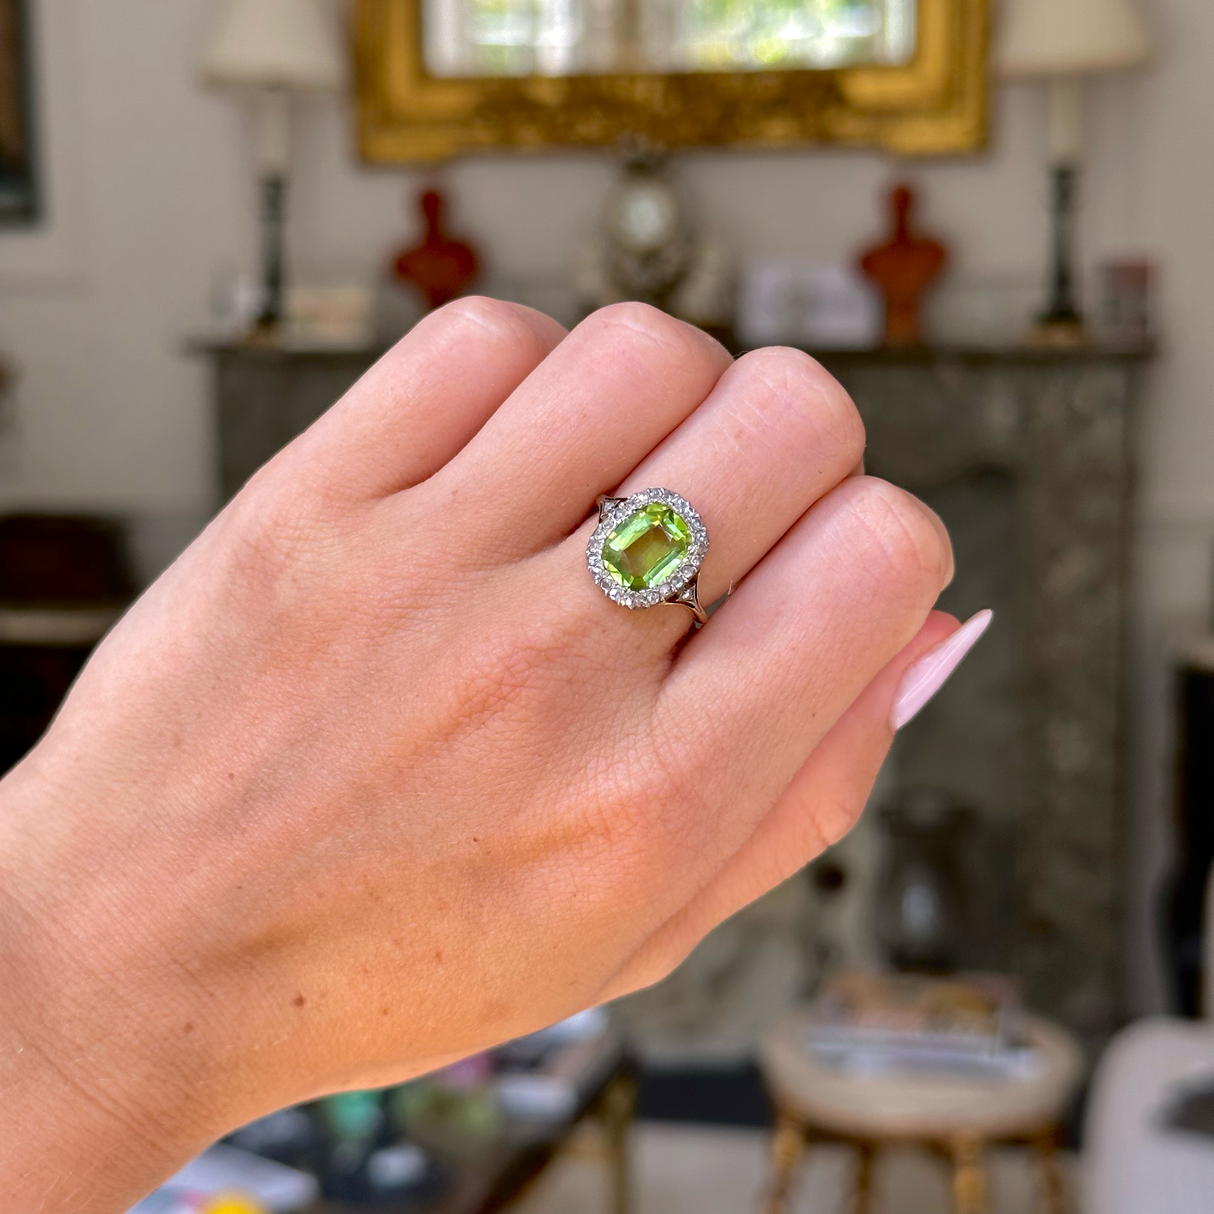 antique peridot and diamond ring, worn on closed hand, front view.